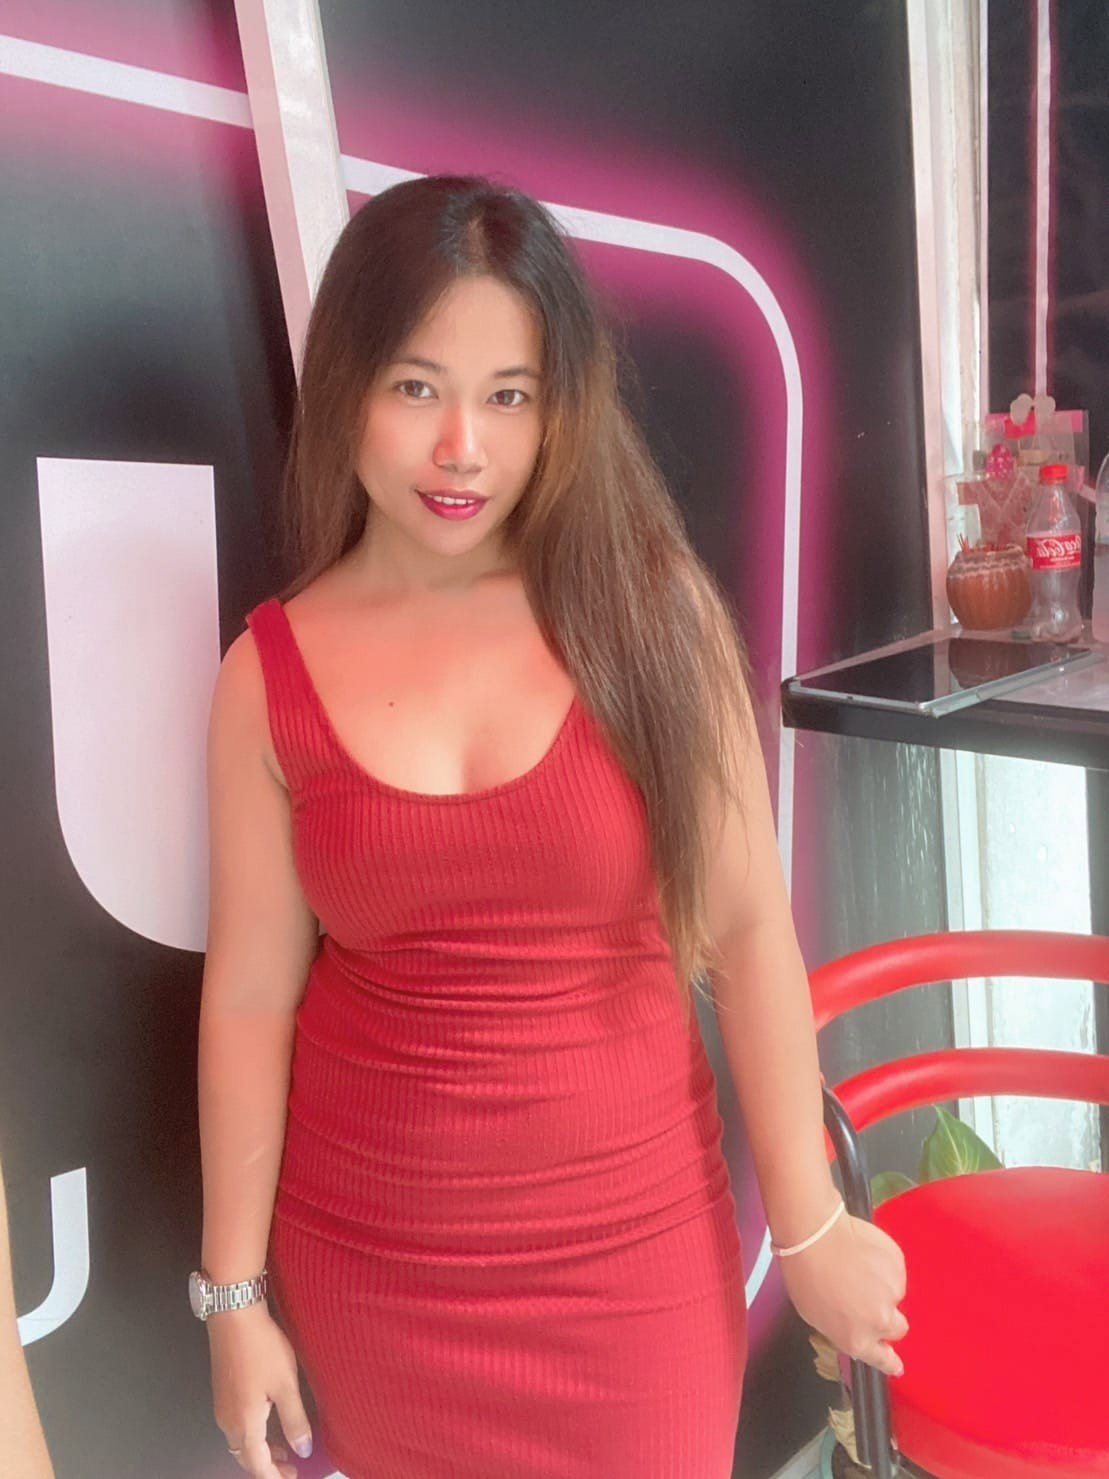 Watch the Photo by LuzyThai with the username @LuzyThai, who is a star user, posted on August 6, 2023 and the text says '#thai #thailand #asian #asia #thaigirl #thaibabe #onlyfans #Contentcreater #loyalfans #asiandoll #girlnextdoor #nudes #amateur #homemade #closeups #pussy
Join me now! FREE TRIAL⚡ https://onlyfans.com/action/trial/x2qpkm5il6mryxbmzmr2uk7kv2dav7g5'